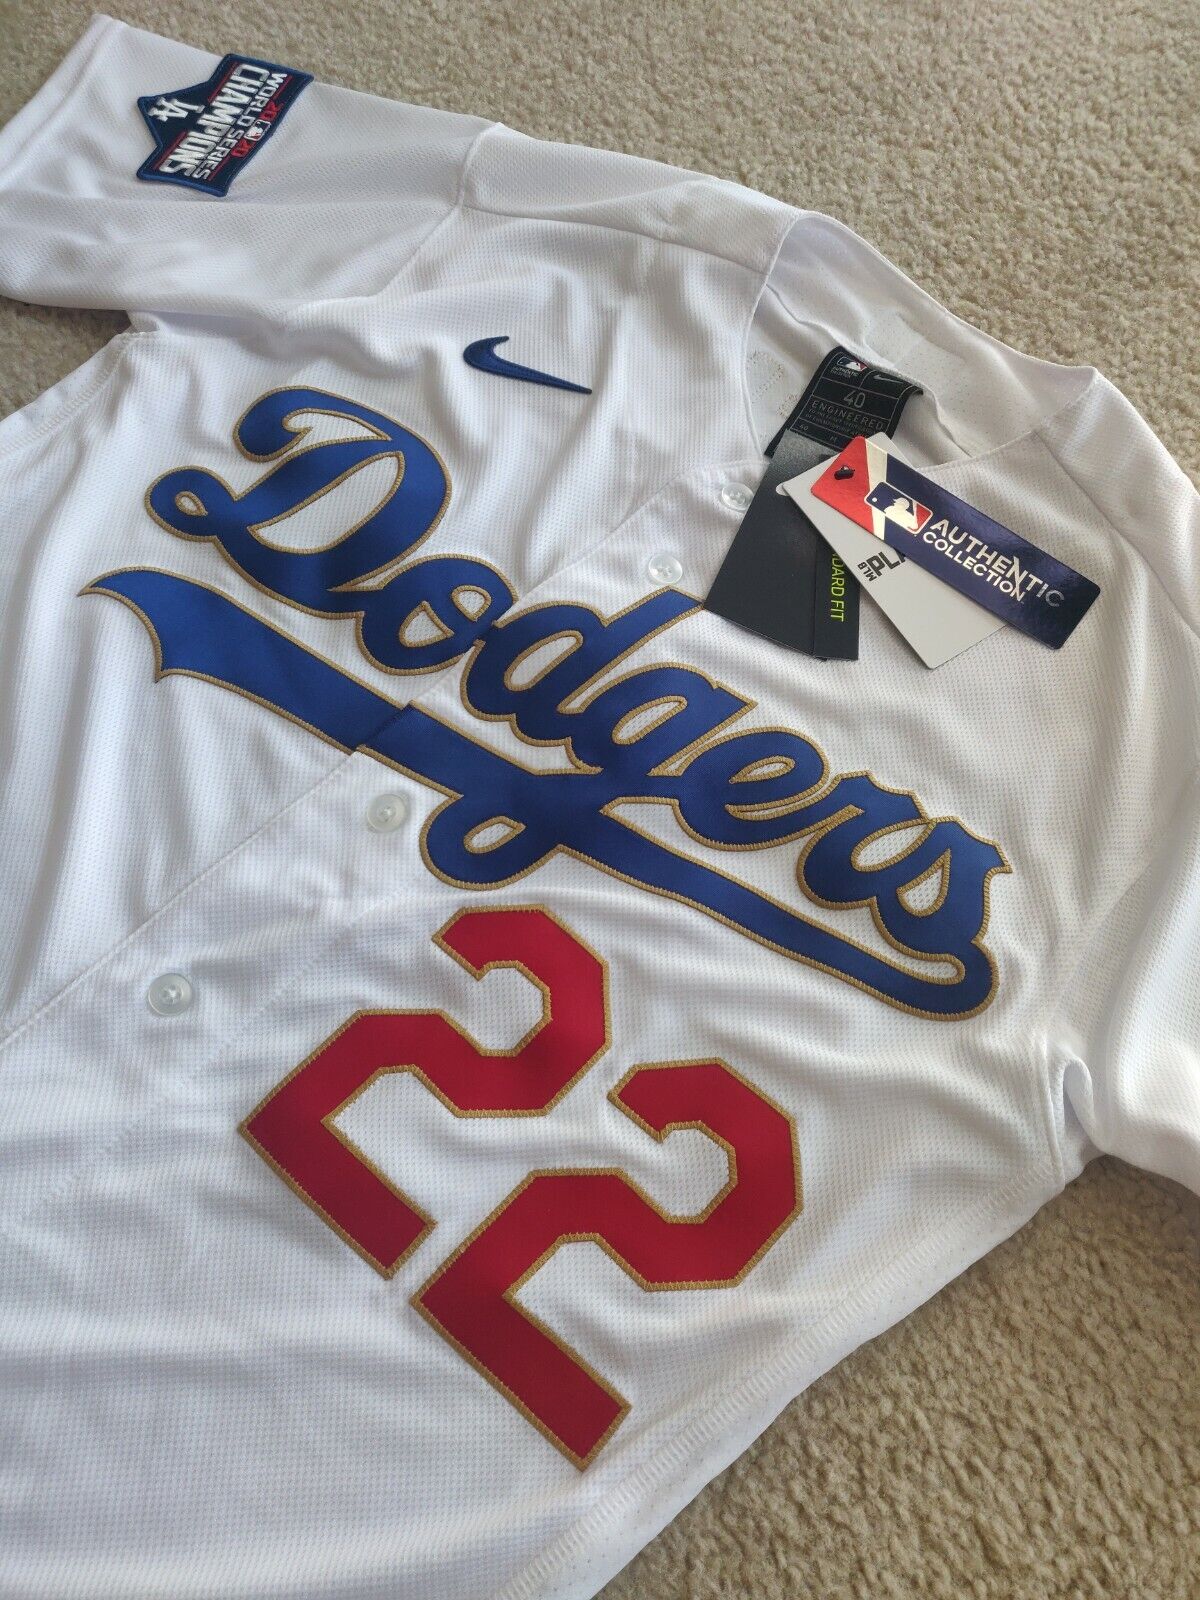 dodgers gold series jersey